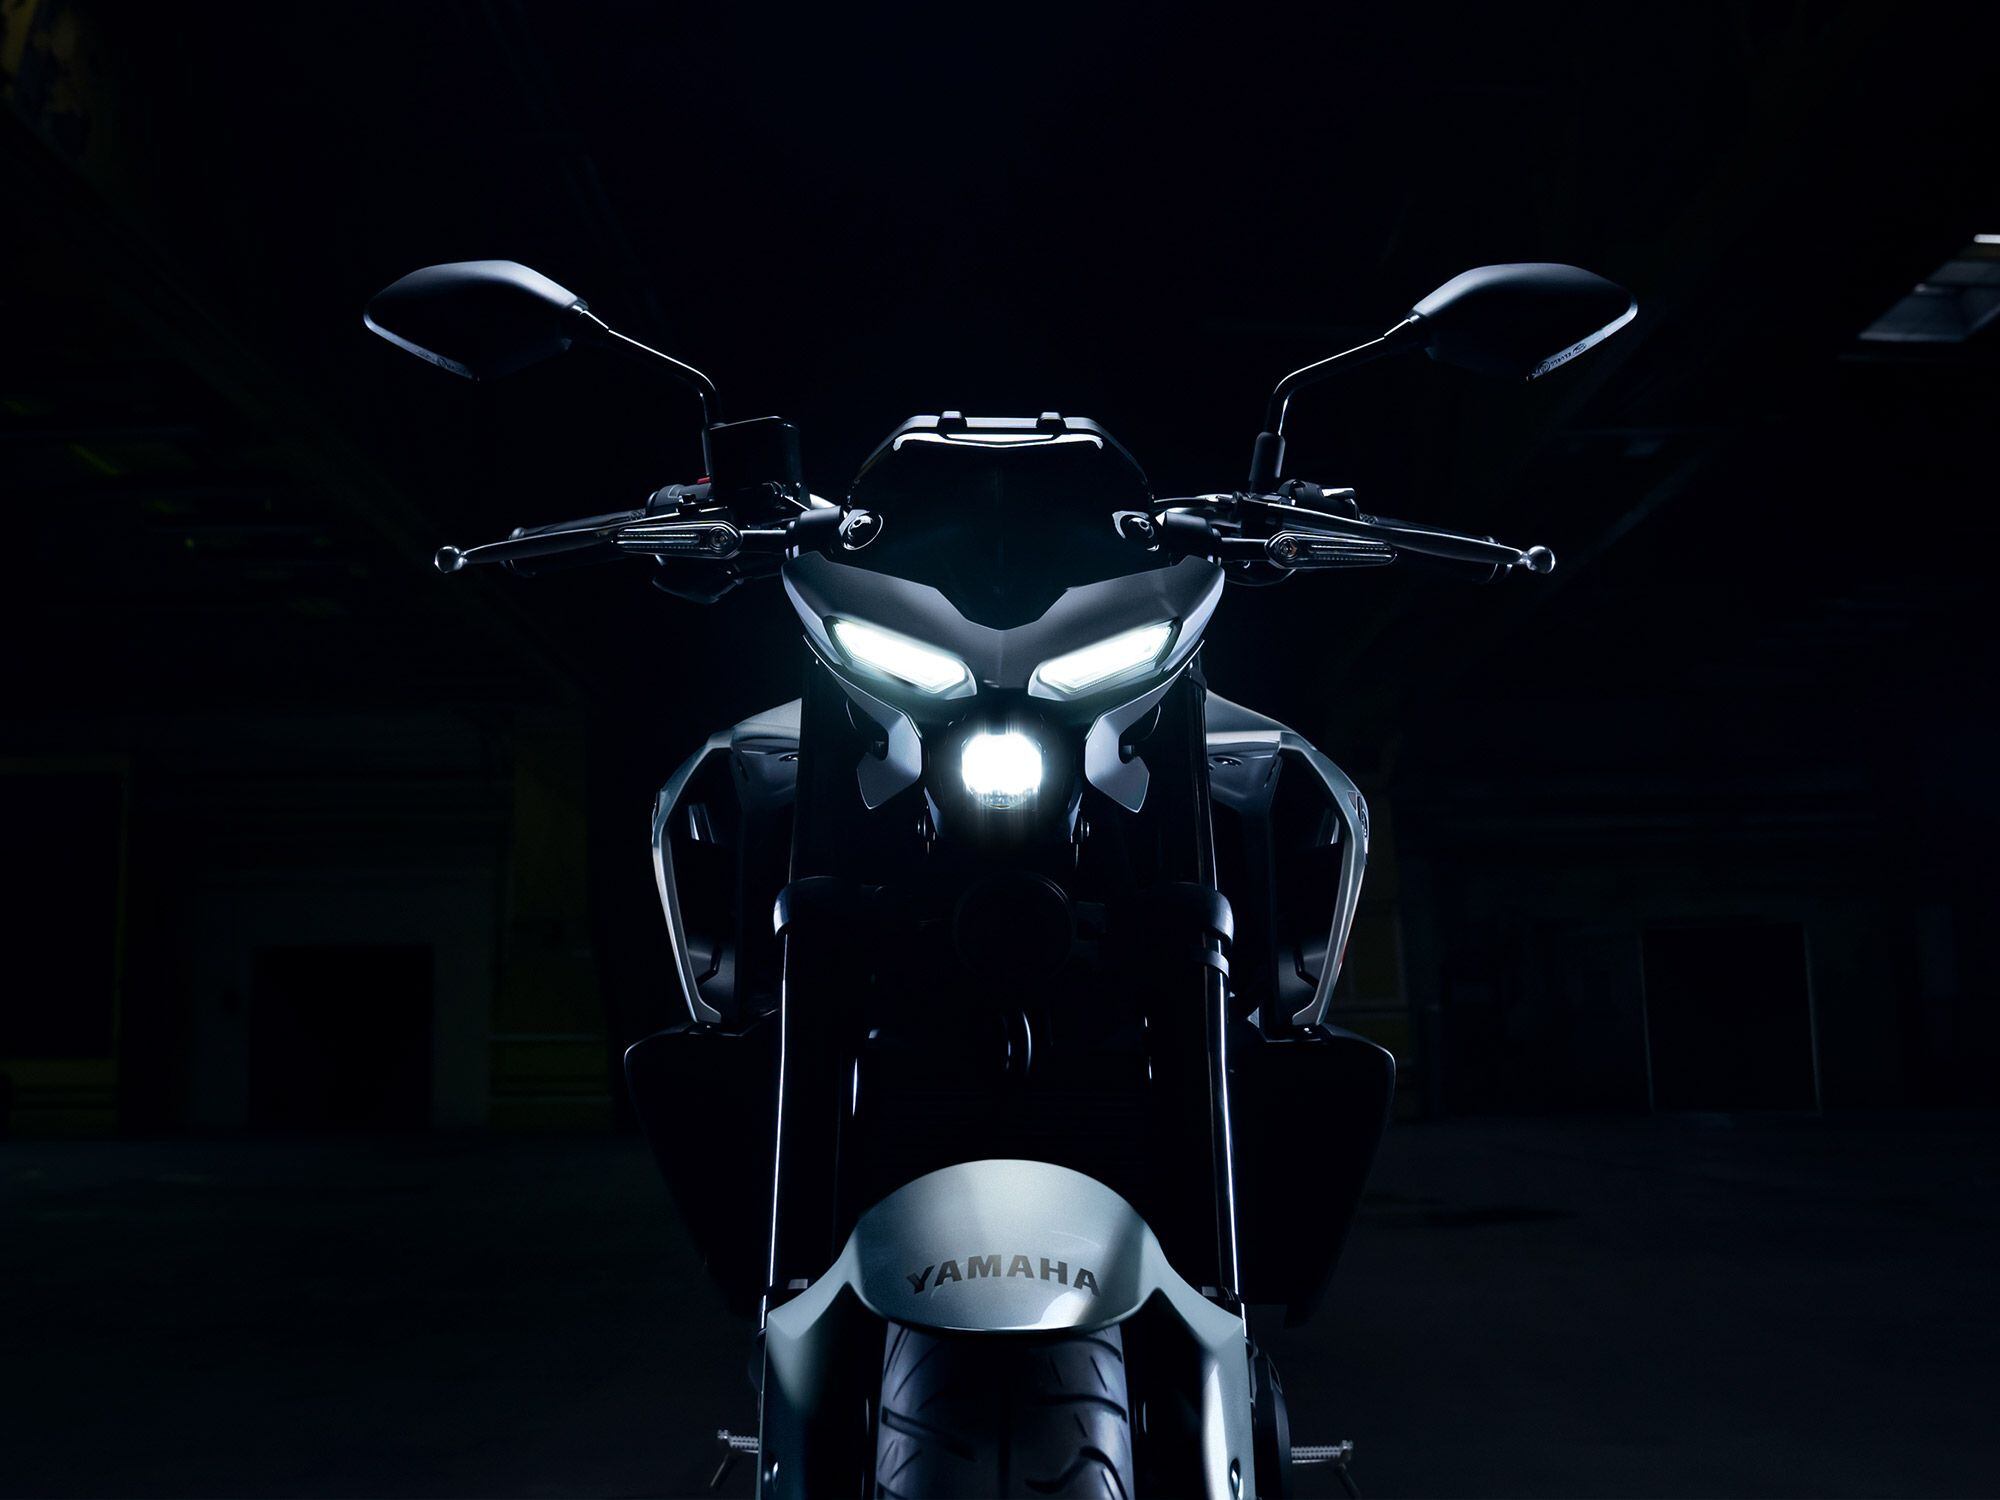 The glare and stare from the MT-03’s LED headlight cluster.